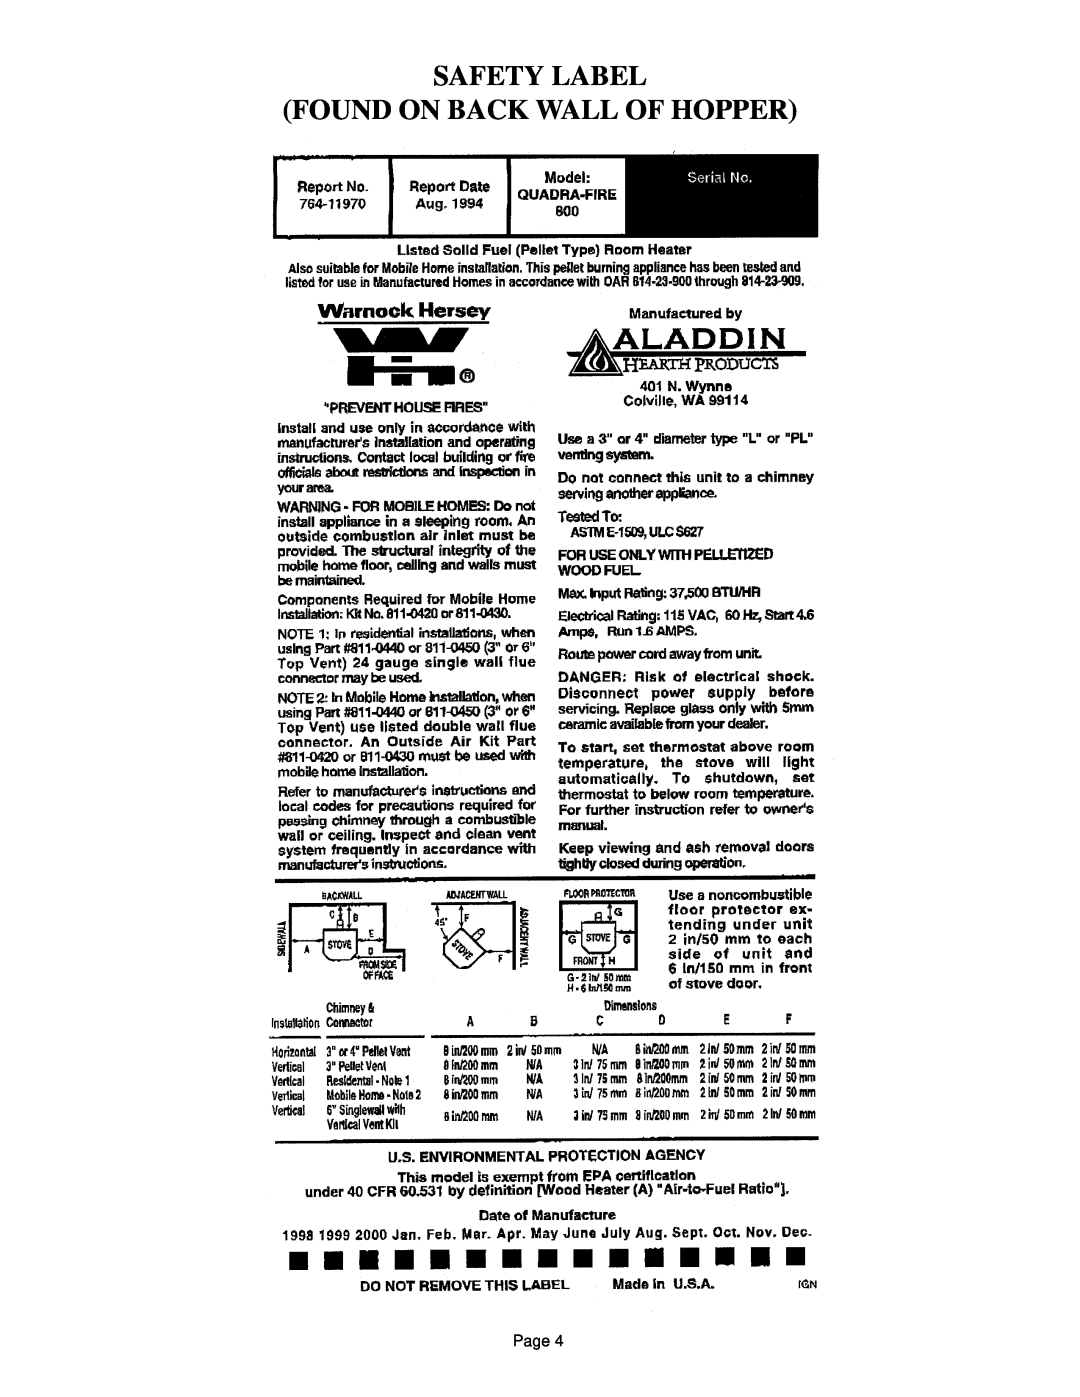 Hearth and Home Technologies 800 owner manual Safety Label Found On Back Wall Of Hopper, Page 